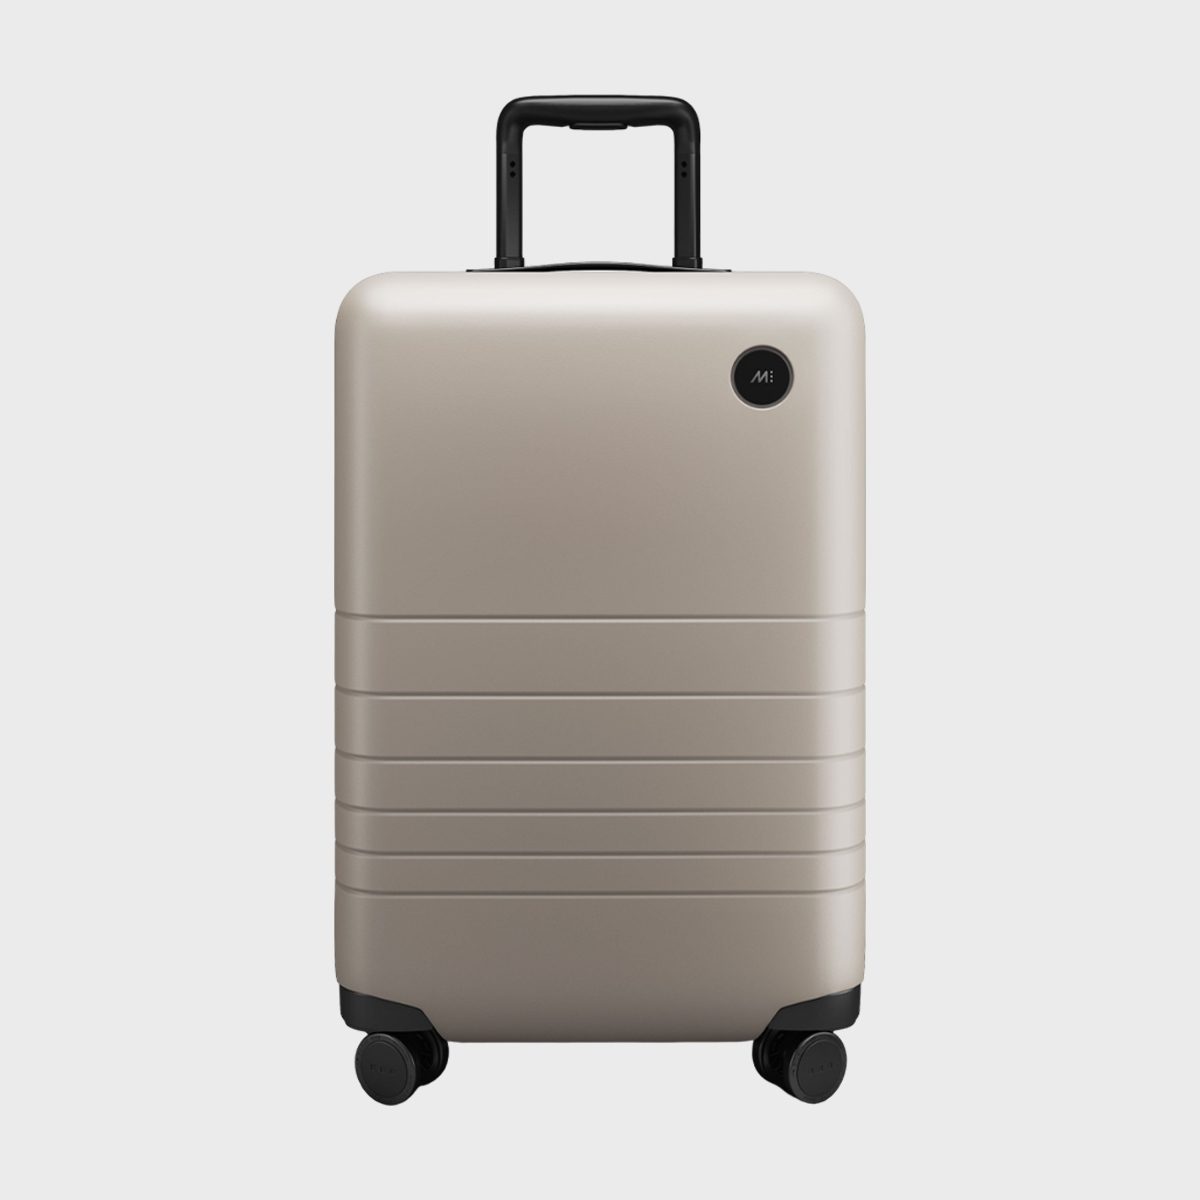 <h3>Monos Carry-On Plus</h3> <p>The <a href="https://monos.com/products/carry-on-plus" rel="noopener">Monos Carry-On Plus</a> suitcase is the epitome of the best carry-on luggage. Weighing just 7.38 pounds, this lightweight travel companion provides ample room for both <a href="https://www.rd.com/list/how-to-pack-with-only-carry-on-bags/">lengthy journeys</a> and quick getaways. It's equipped with exceptional details like a built-in TSA-approved lock, a sturdy telescopic handle, stylish vegan leather accents and whisper-quiet spinner wheels. Plus, the brand calls its polycarbonate shell "unbreakable," and its lifetime warranty ensures it'll last forever.</p> <p>"Really love how sleek this suitcase is, both with the aesthetics and function," writes Gina R. in her five-star review. "Moving from an old-style suitcase, the maneuverability of this is a dream—quiet, smooth and balanced wheeling both upright and pulling at a tilt."</p> <p><strong>Pros</strong></p> <ul> <li>Lightweight (just 7.38 pounds)</li> <li>100-day trial</li> <li>Lifetime warranty</li> <li>Adjustable telescopic handle with four height settings</li> <li>Ten colors and patterns</li> <li>Aerospace-grade and water-resistant hard shell</li> </ul> <p><strong>Cons</strong></p> <ul> <li>No built-in battery</li> </ul> <p class="listicle-page__cta-button-shop"><a class="shop-btn" href="https://monos.com/products/carry-on-plus">Shop Now</a></p>